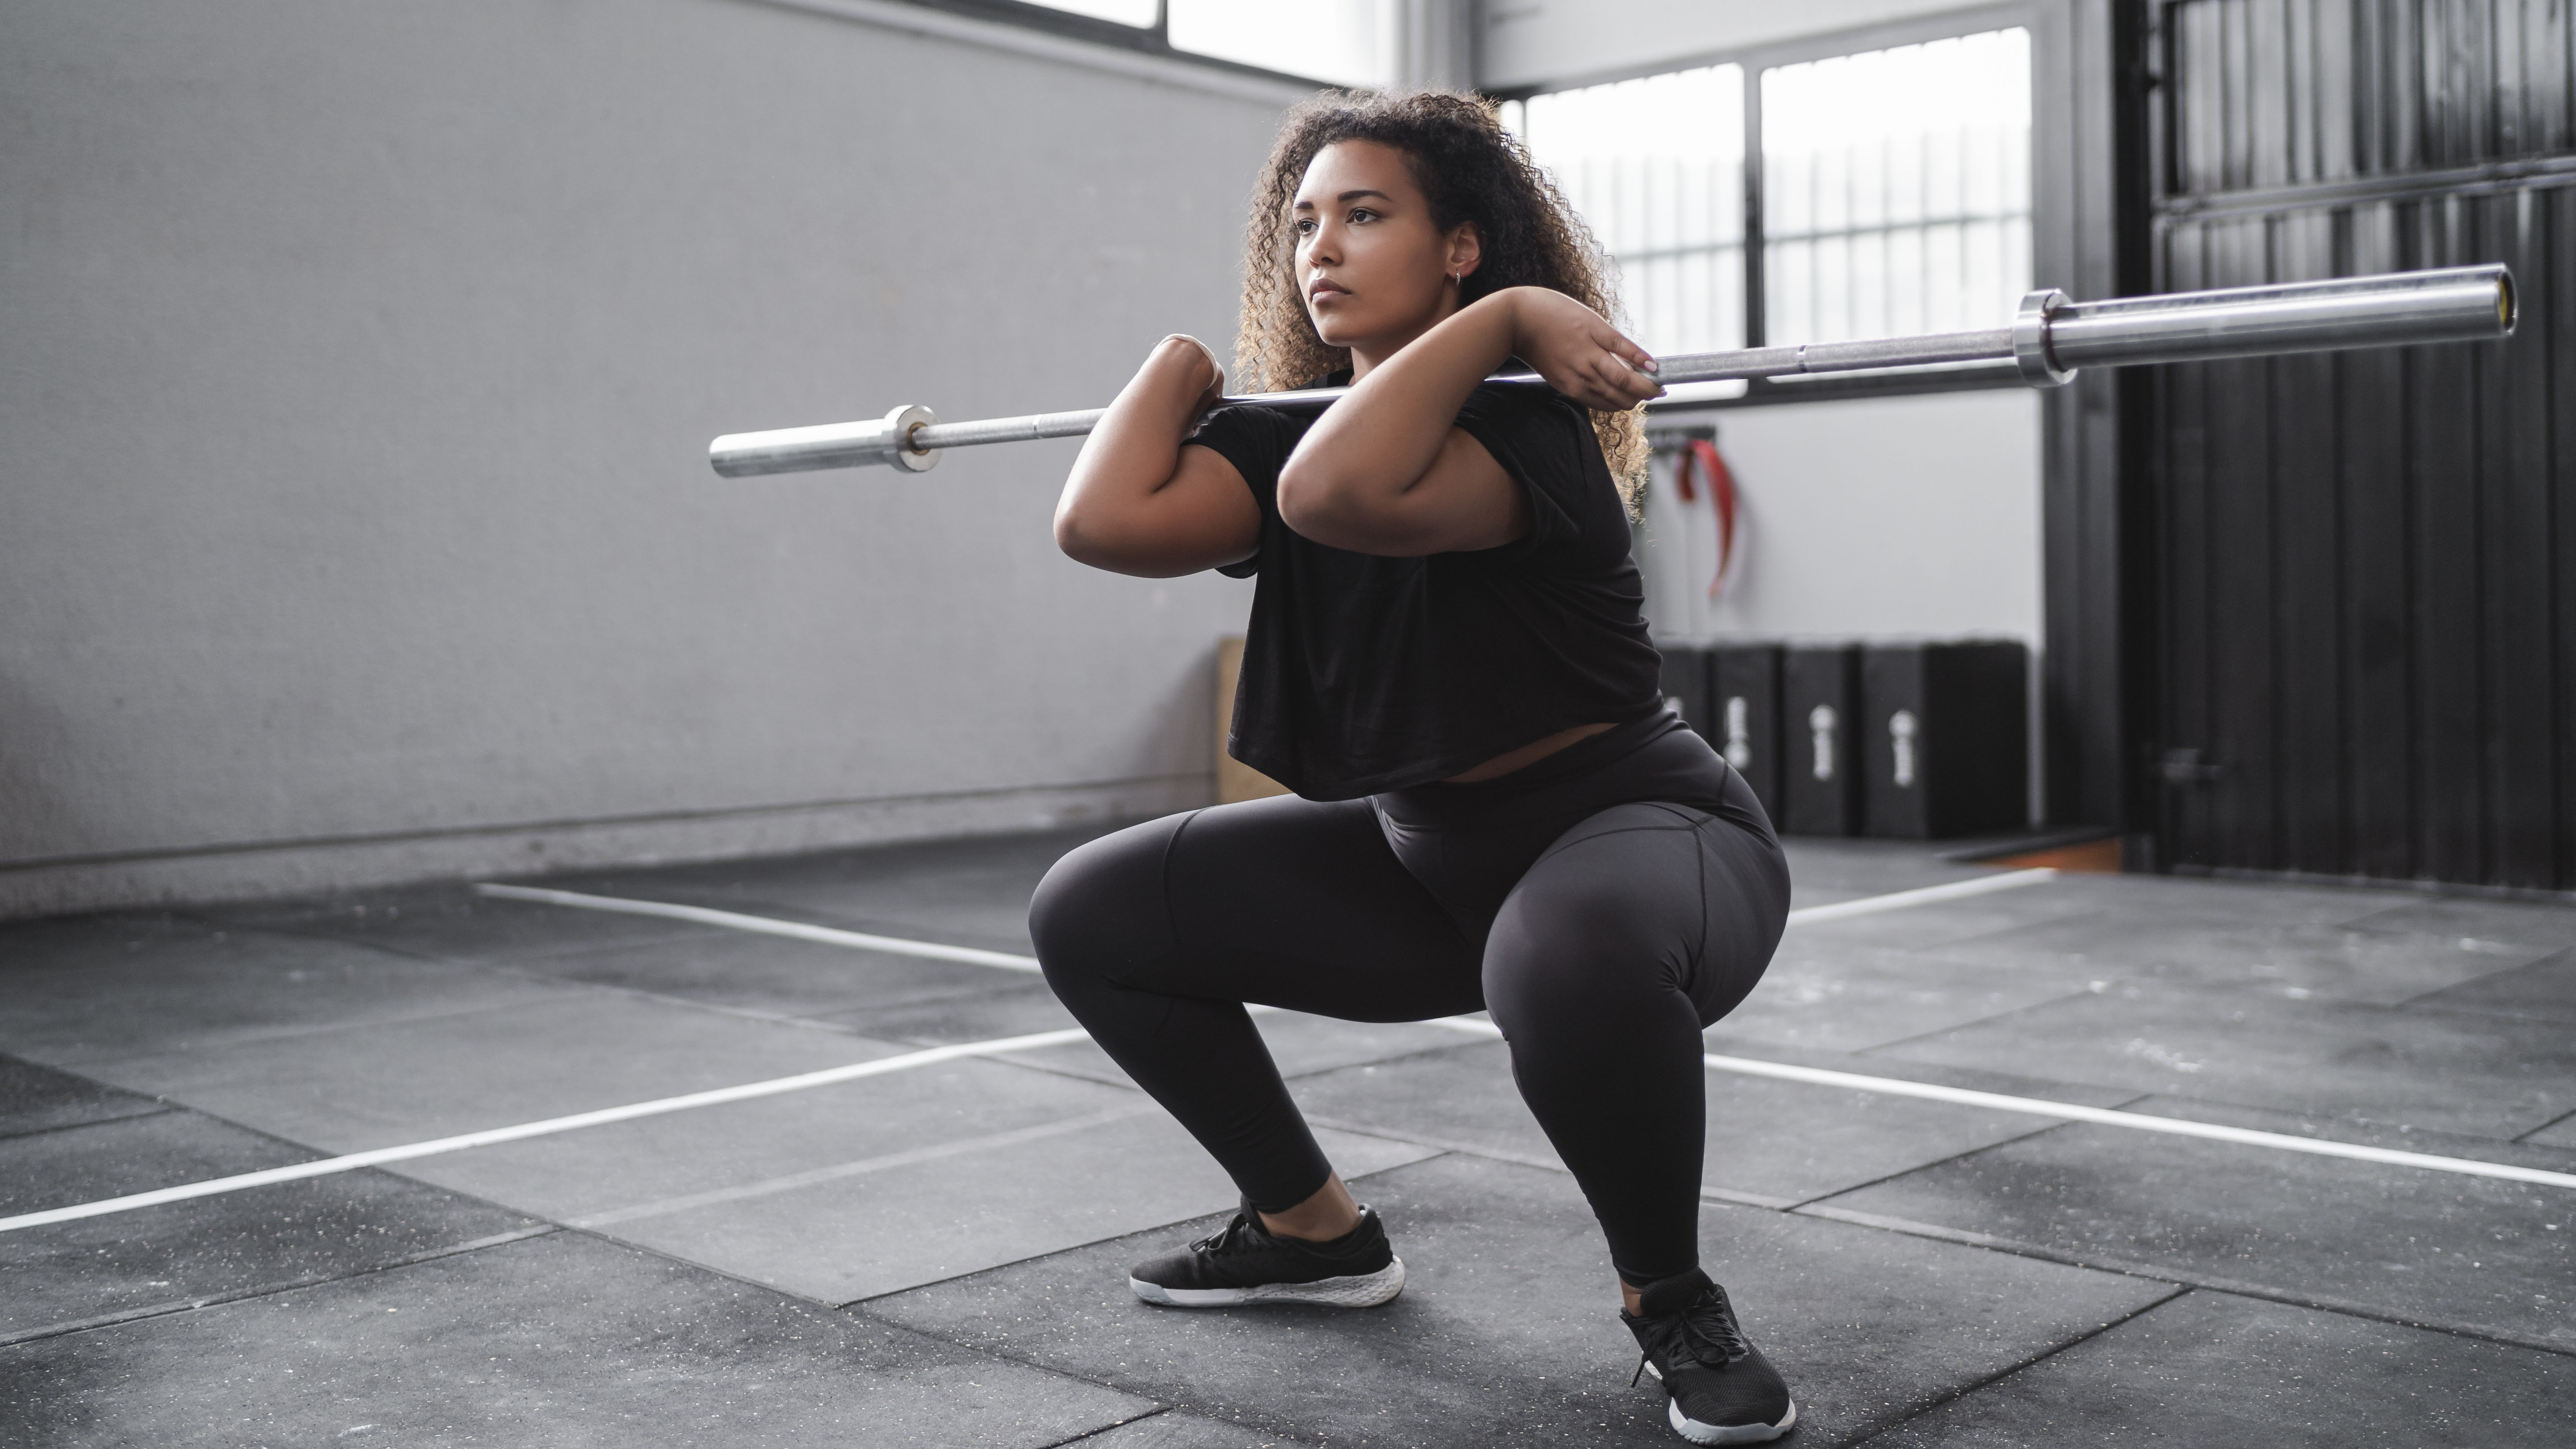 Single Leg Squat: How-To, Variations, Benefits, Safety